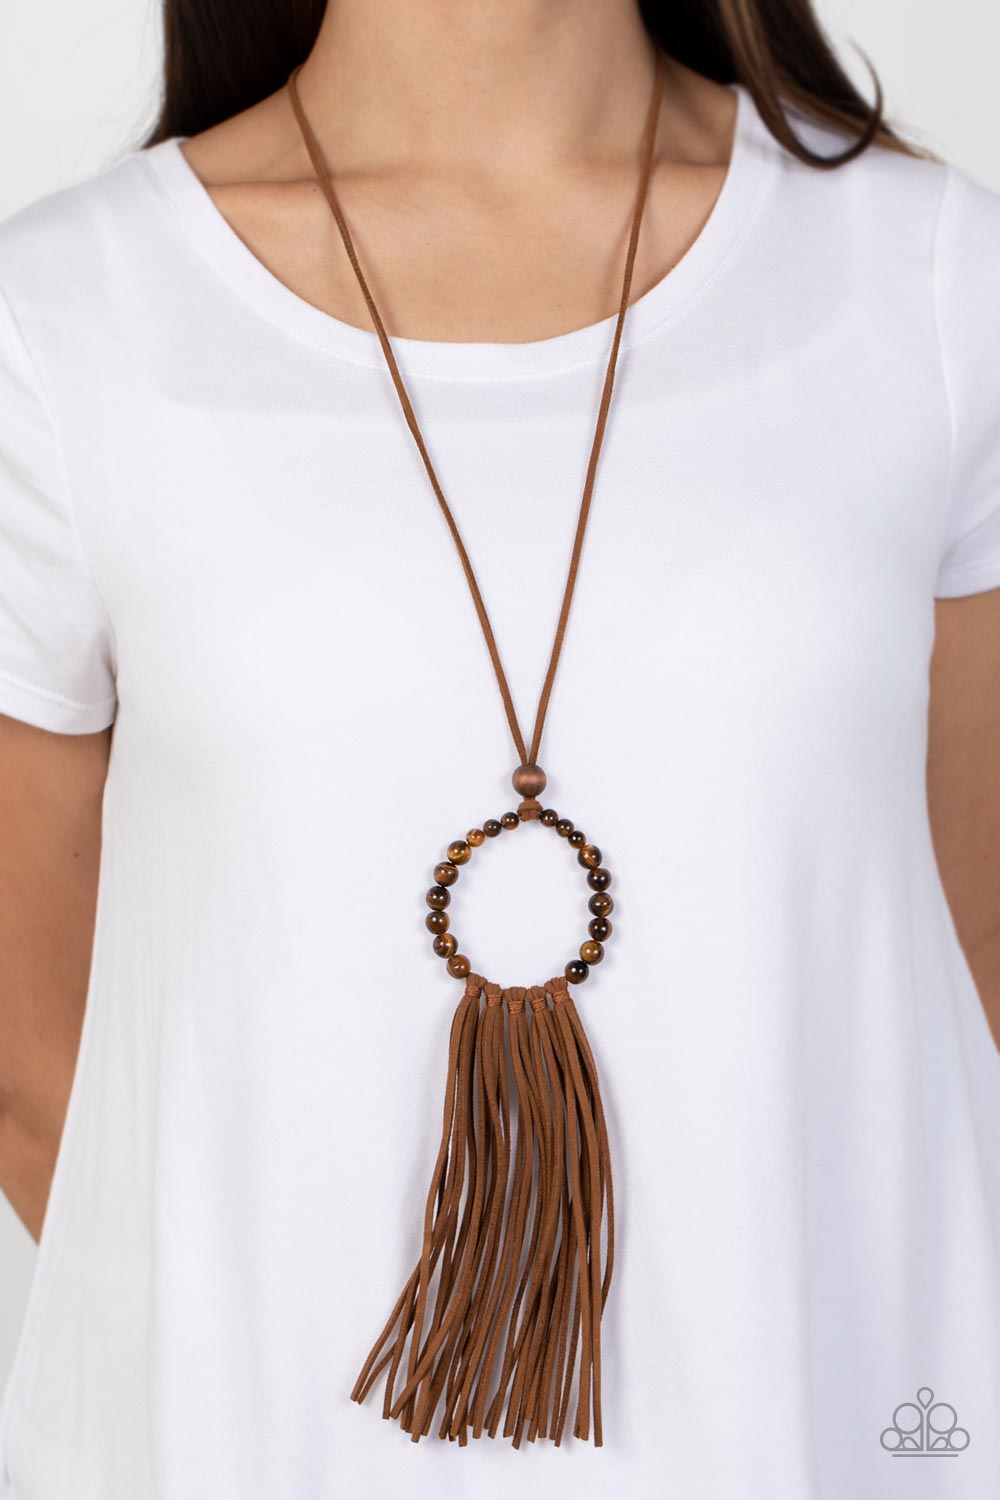 Paparazzi Accessories - Namaste Mama #N786 - Brown Necklace